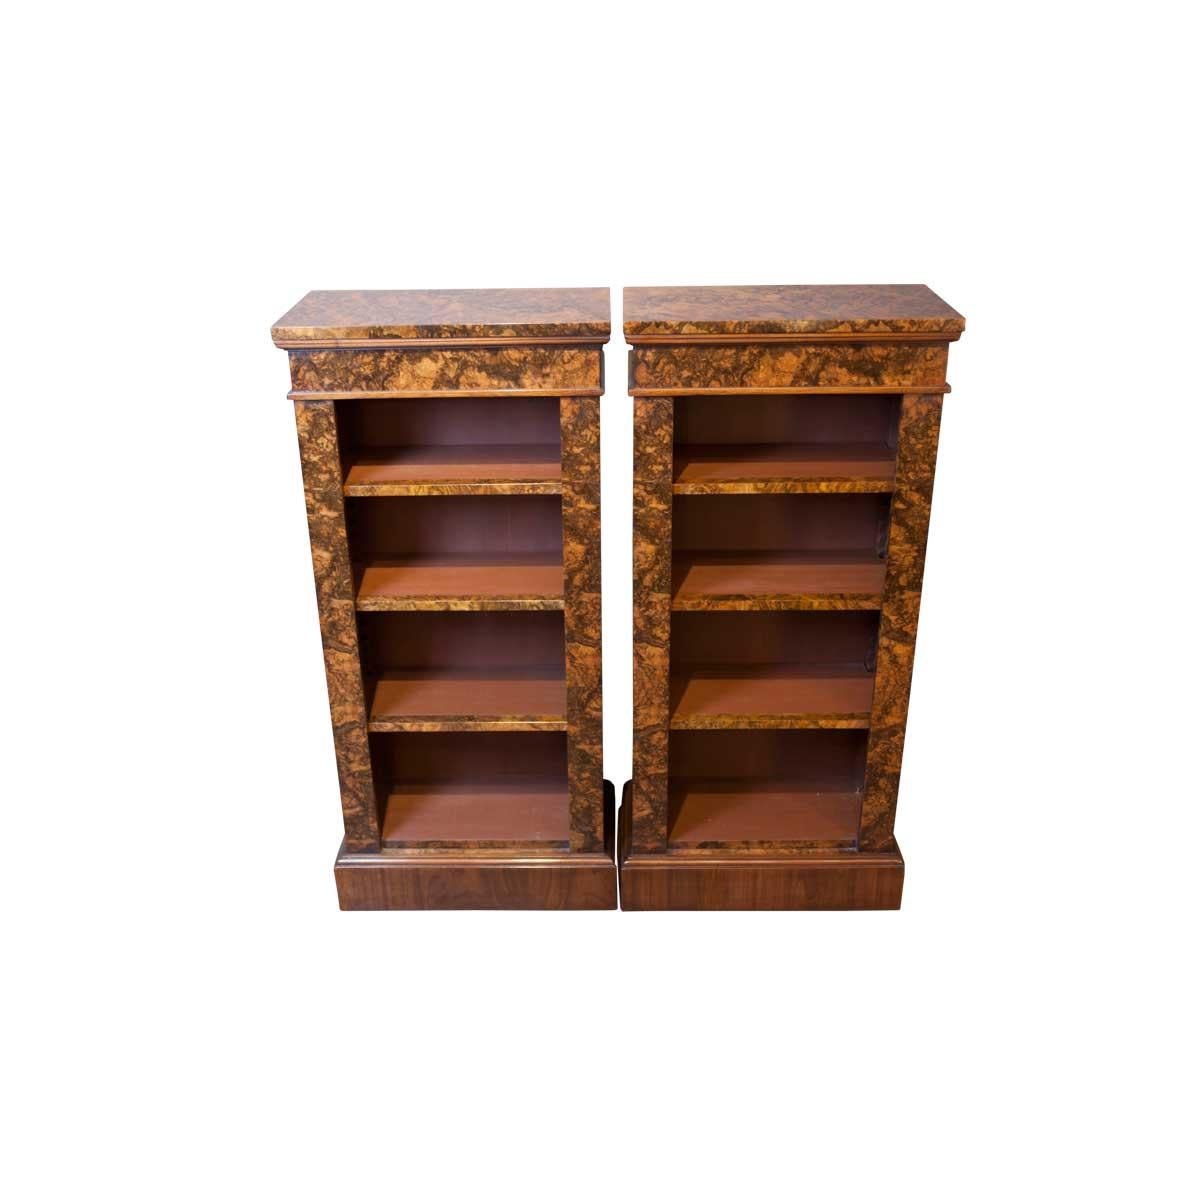 19th century style American walnut and burr walnut open bookcases with fully adjustable shelves.

Models shown: 51cm W x 27cm D x 108cm H.